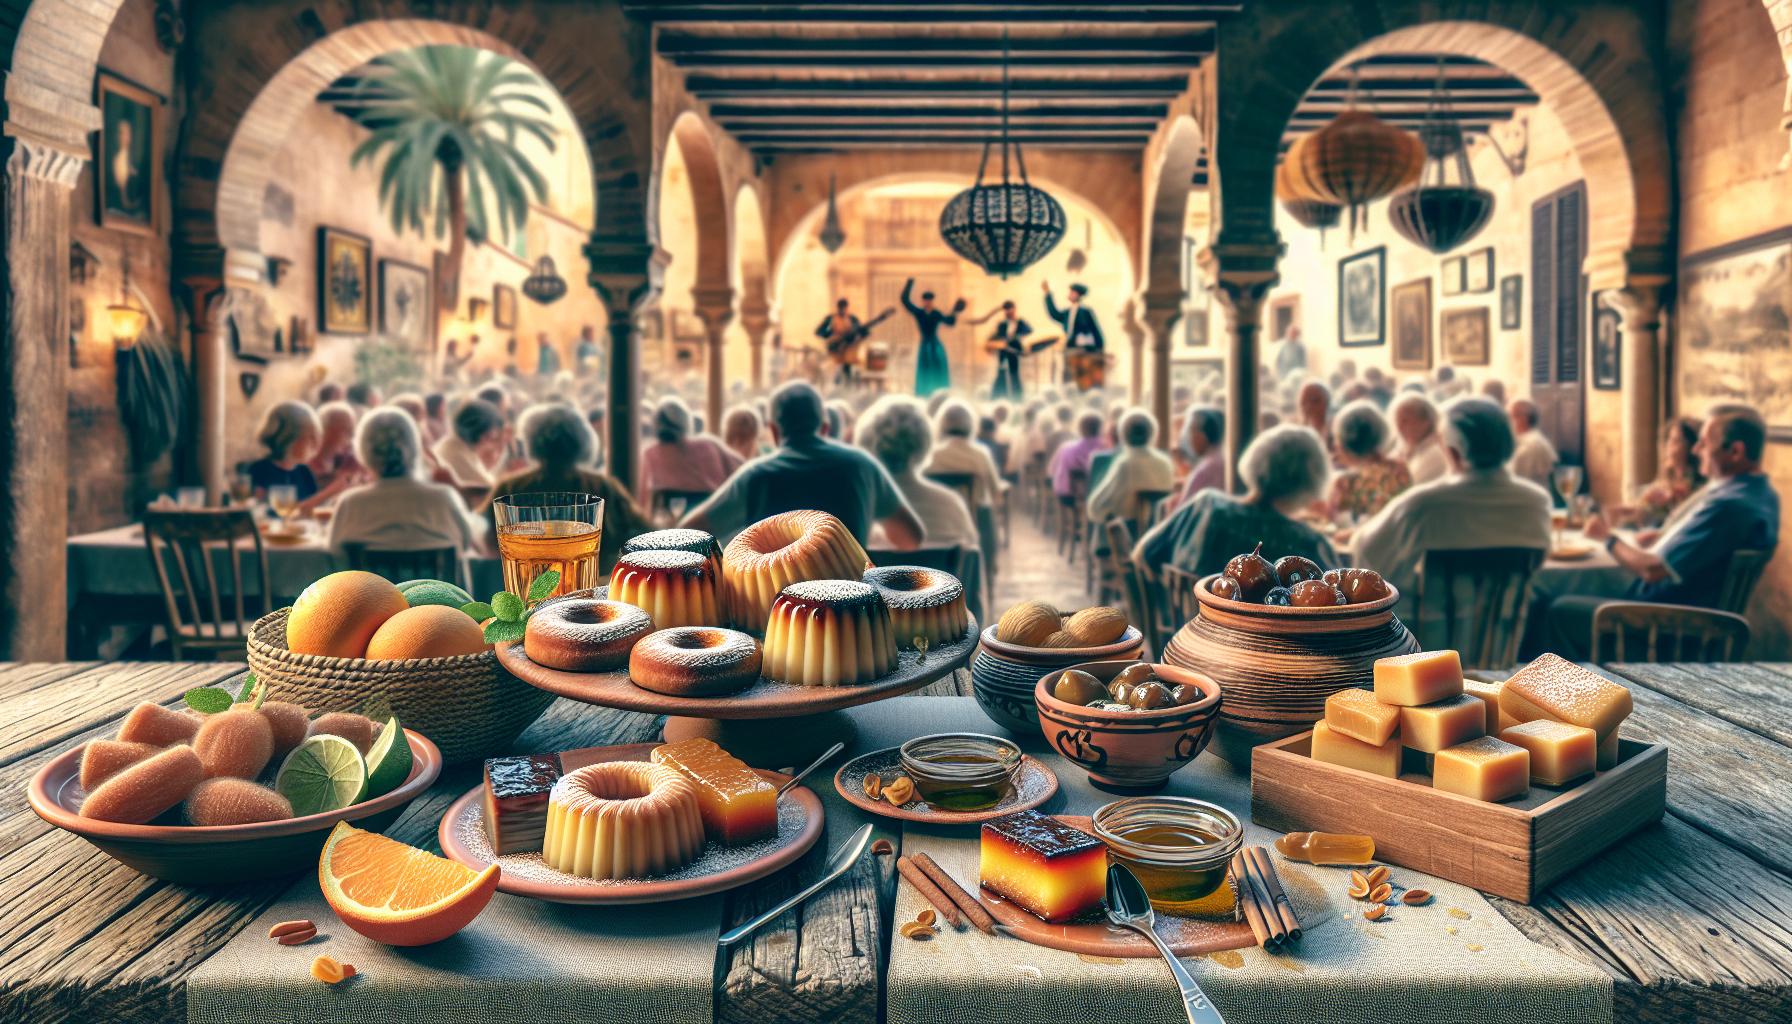 Are There Traditional Mallorcan Desserts You Must Try in Palma?